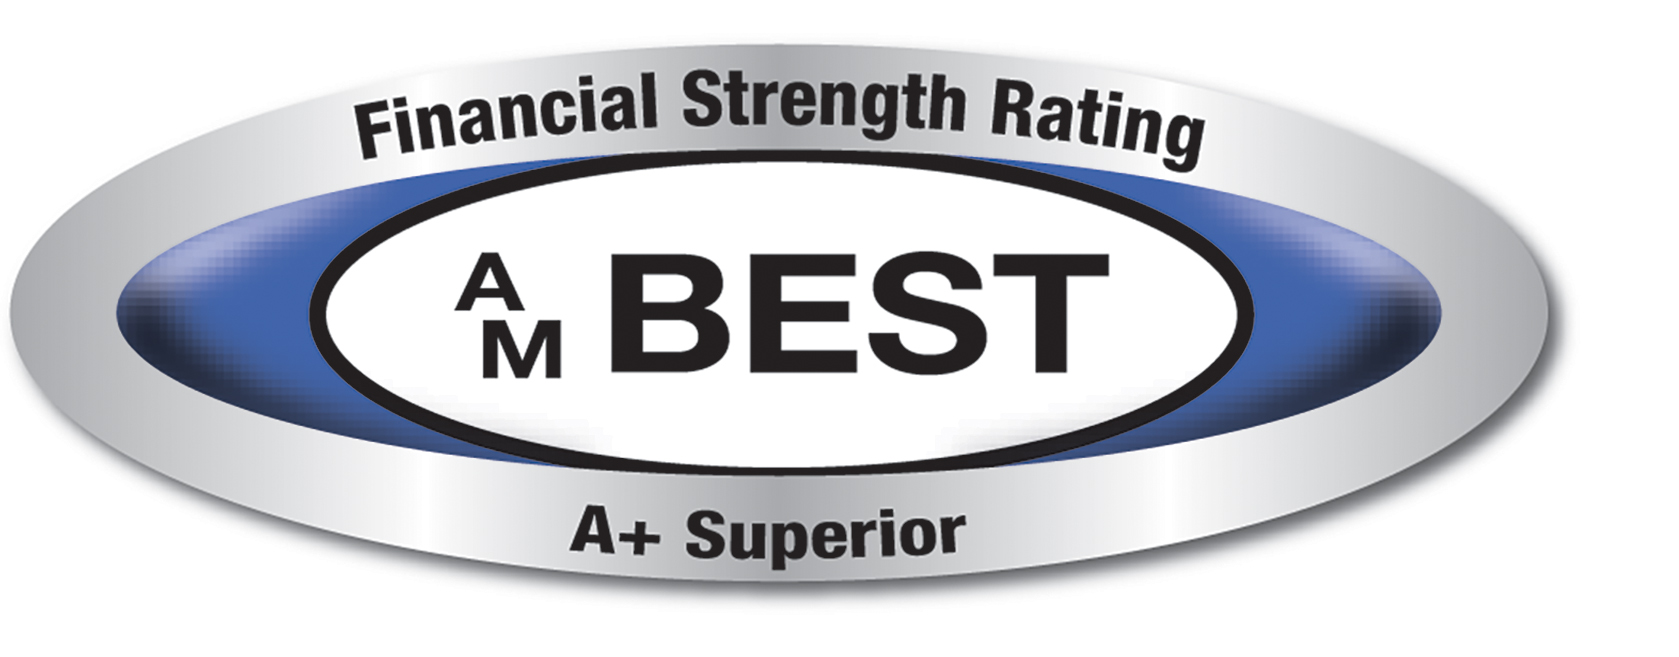 AM Best A+ company rating